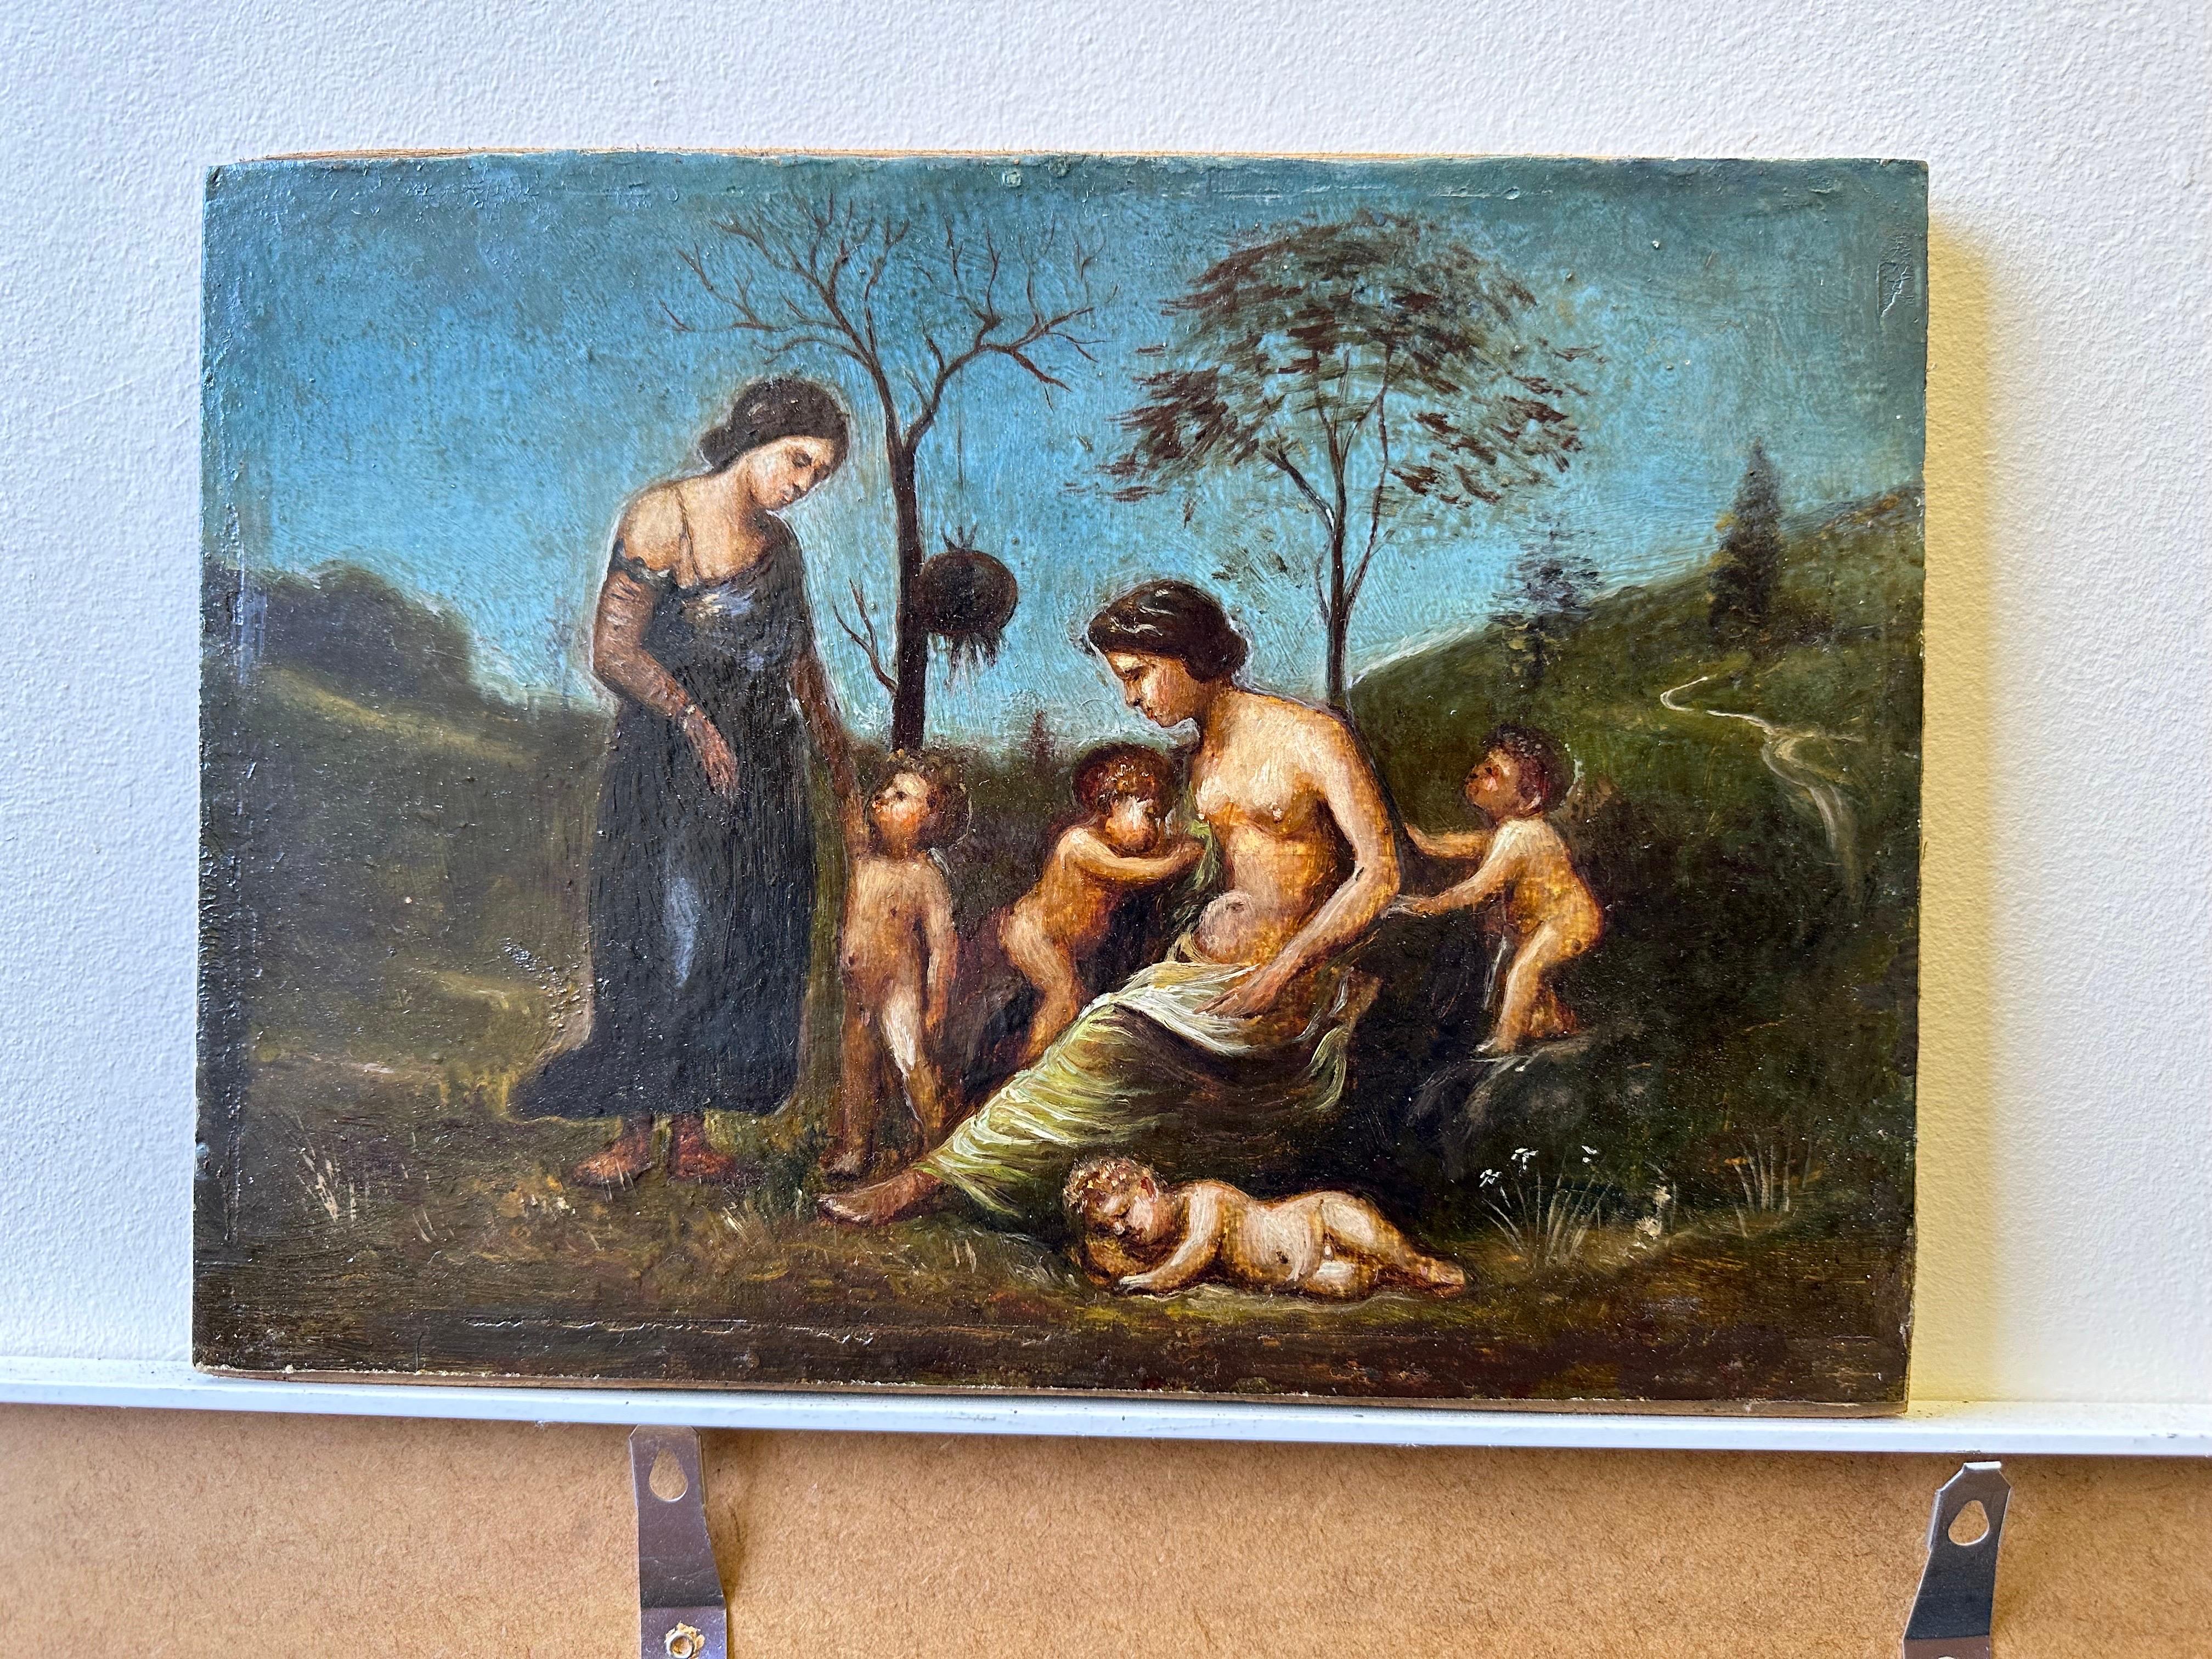 Classical Figures in Ancient Landscape
Italian School, 18th century
oil on panel, 
painting: 9 x 12 inches
provenance: private collection, Paris
condition: very good and sound condition